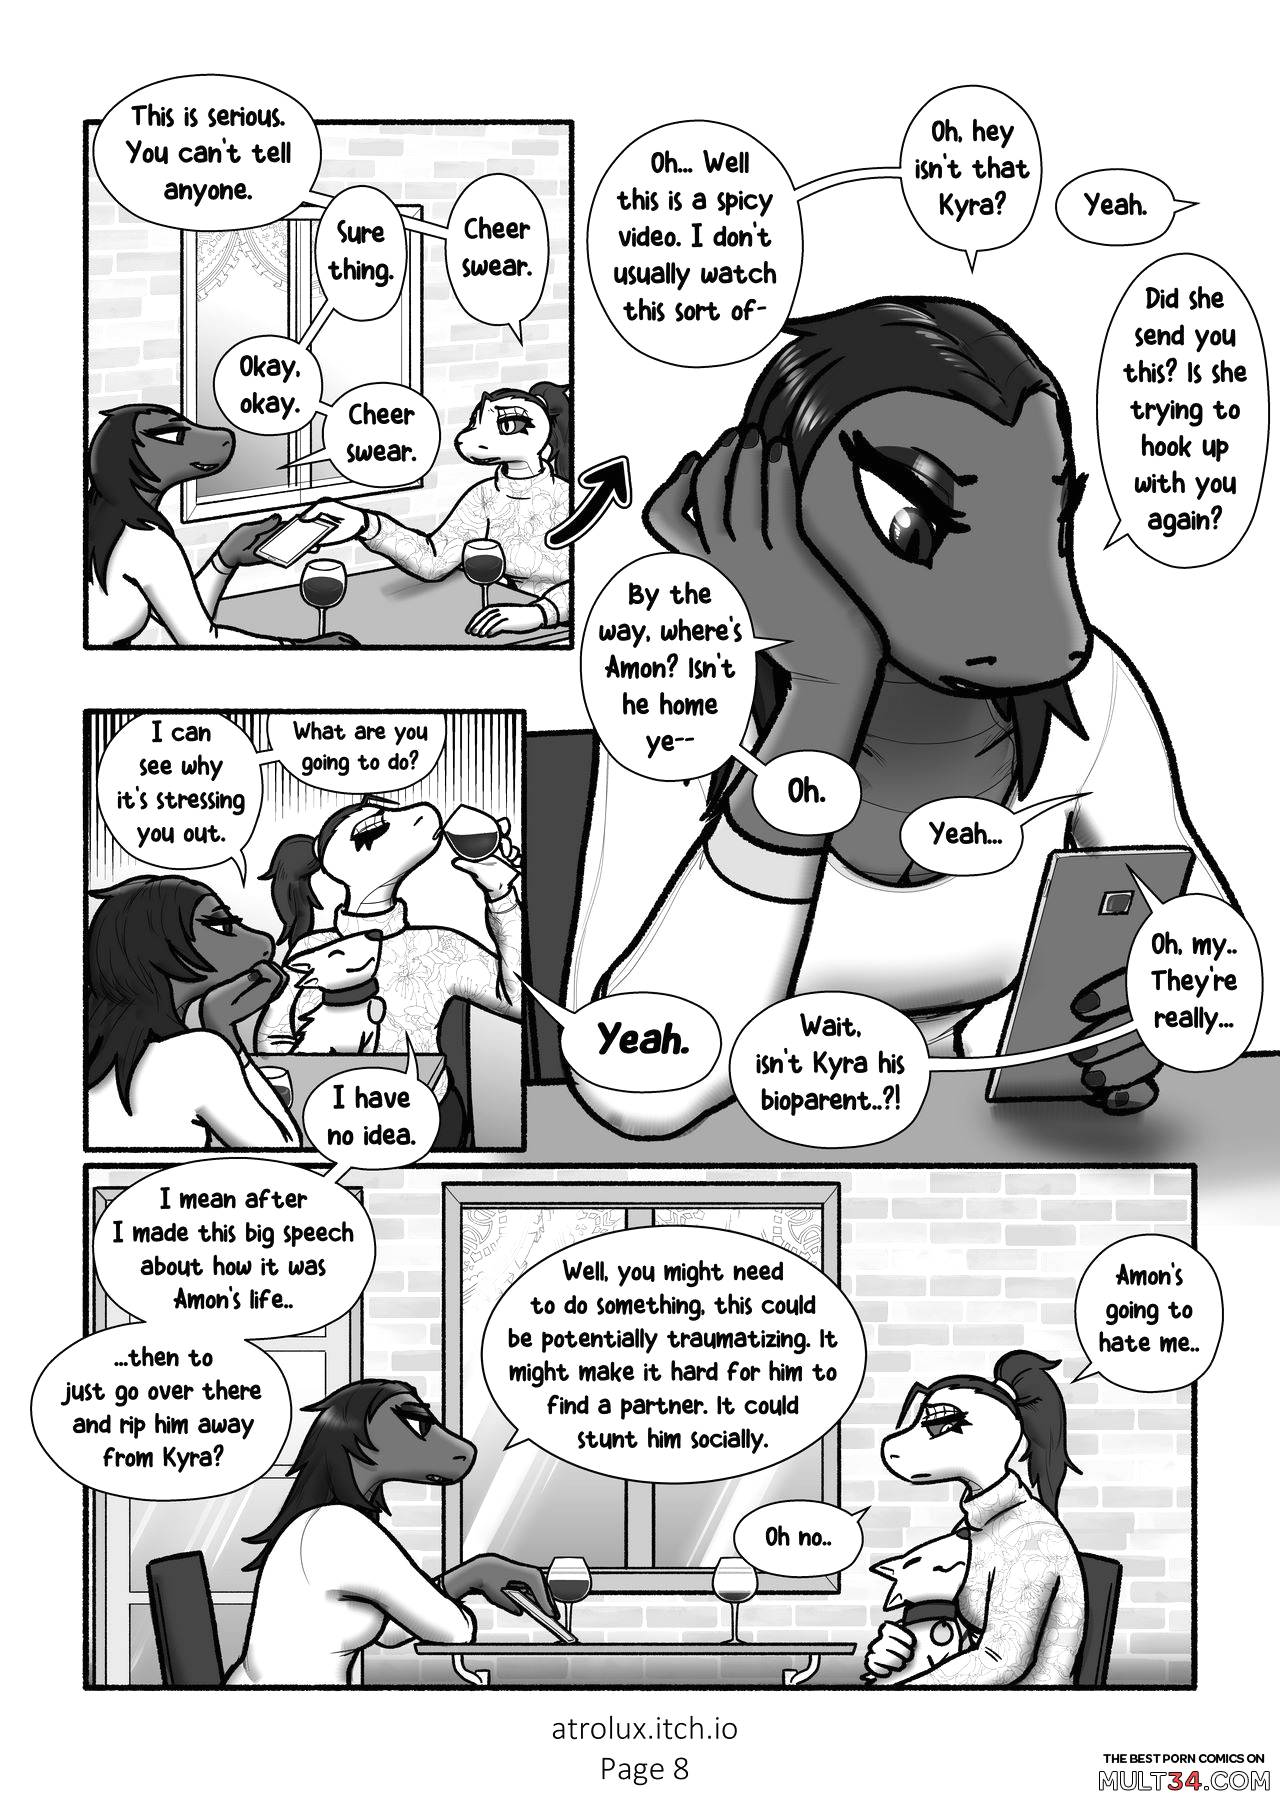 Shedding Inhibitions 6 - Feigned Innocence page 11